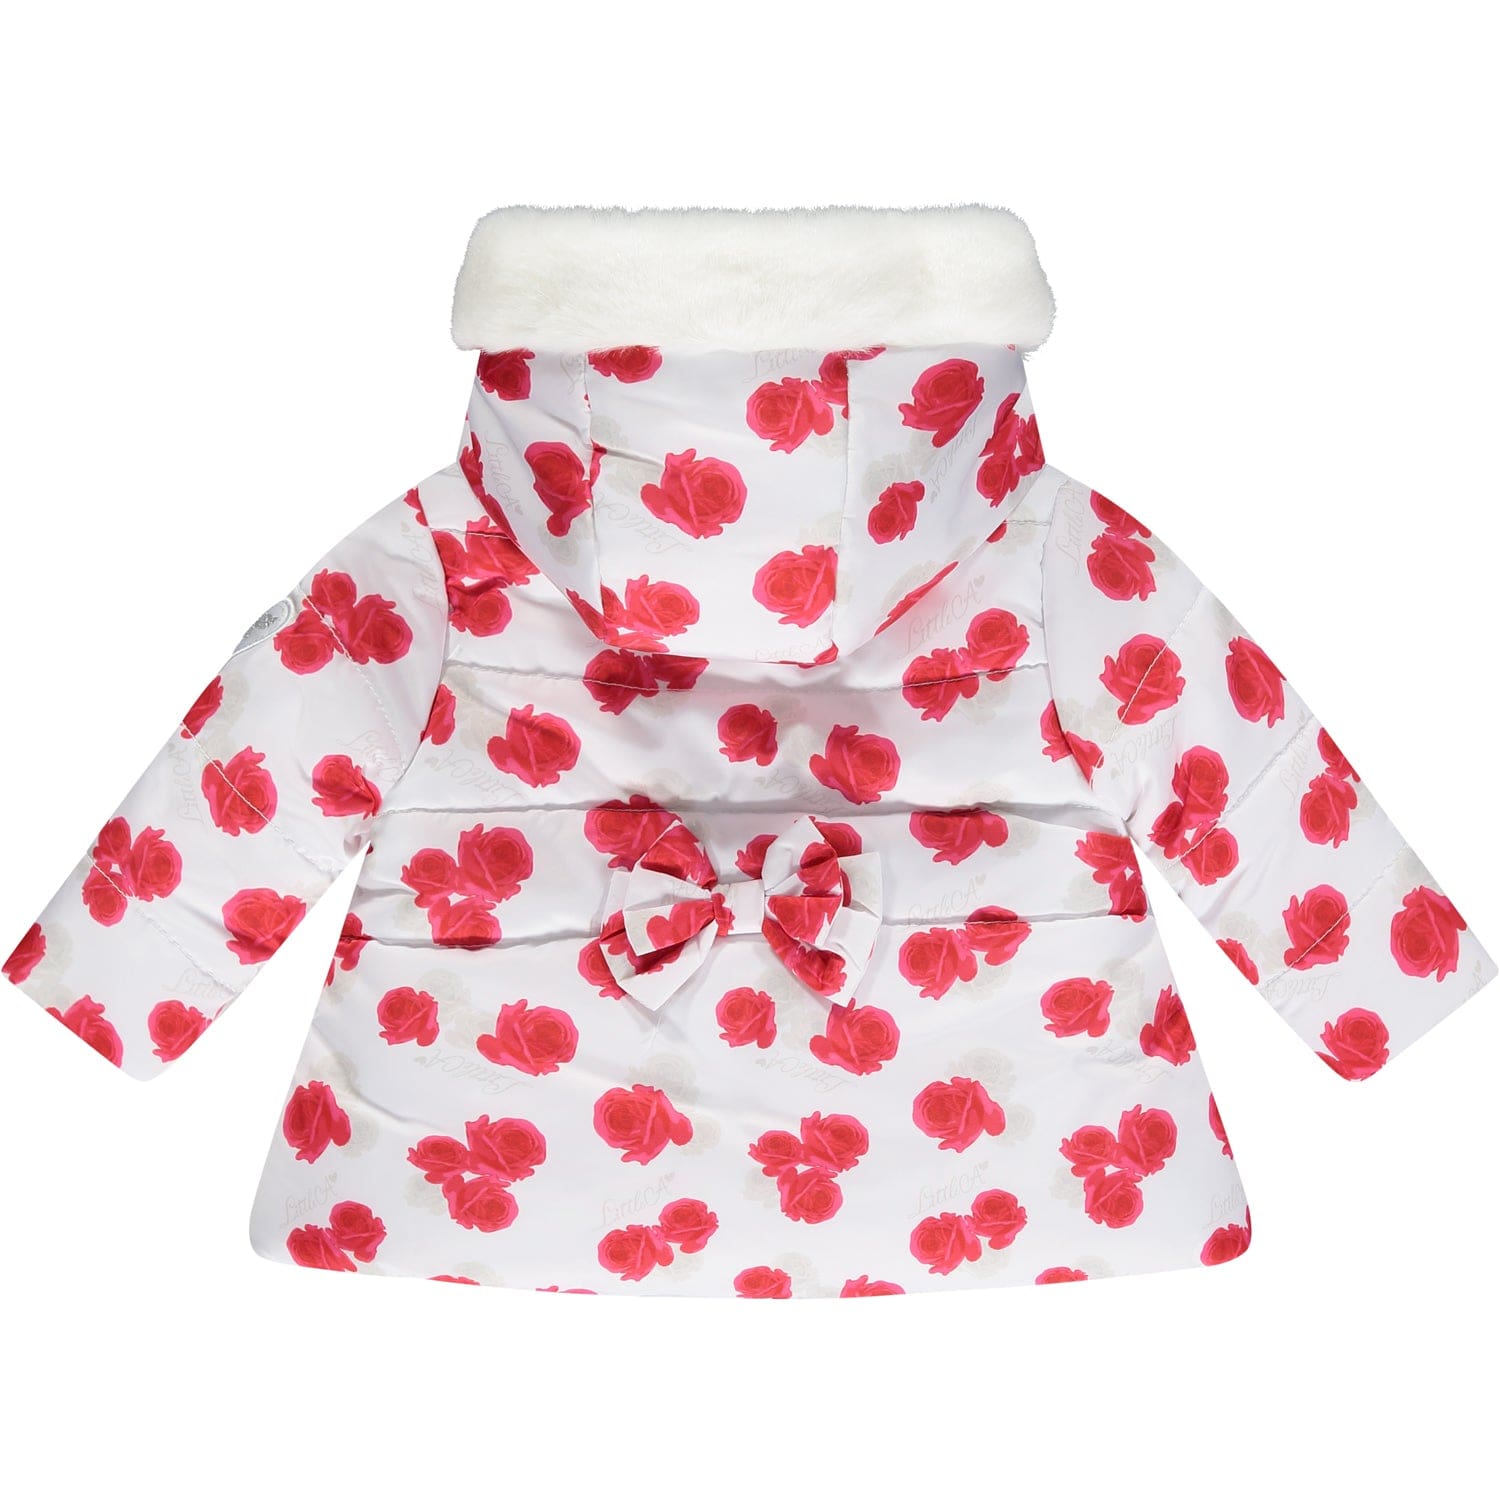 LITTLE A - Felicity Rose Print Jacket With Faux Fur Trim - White